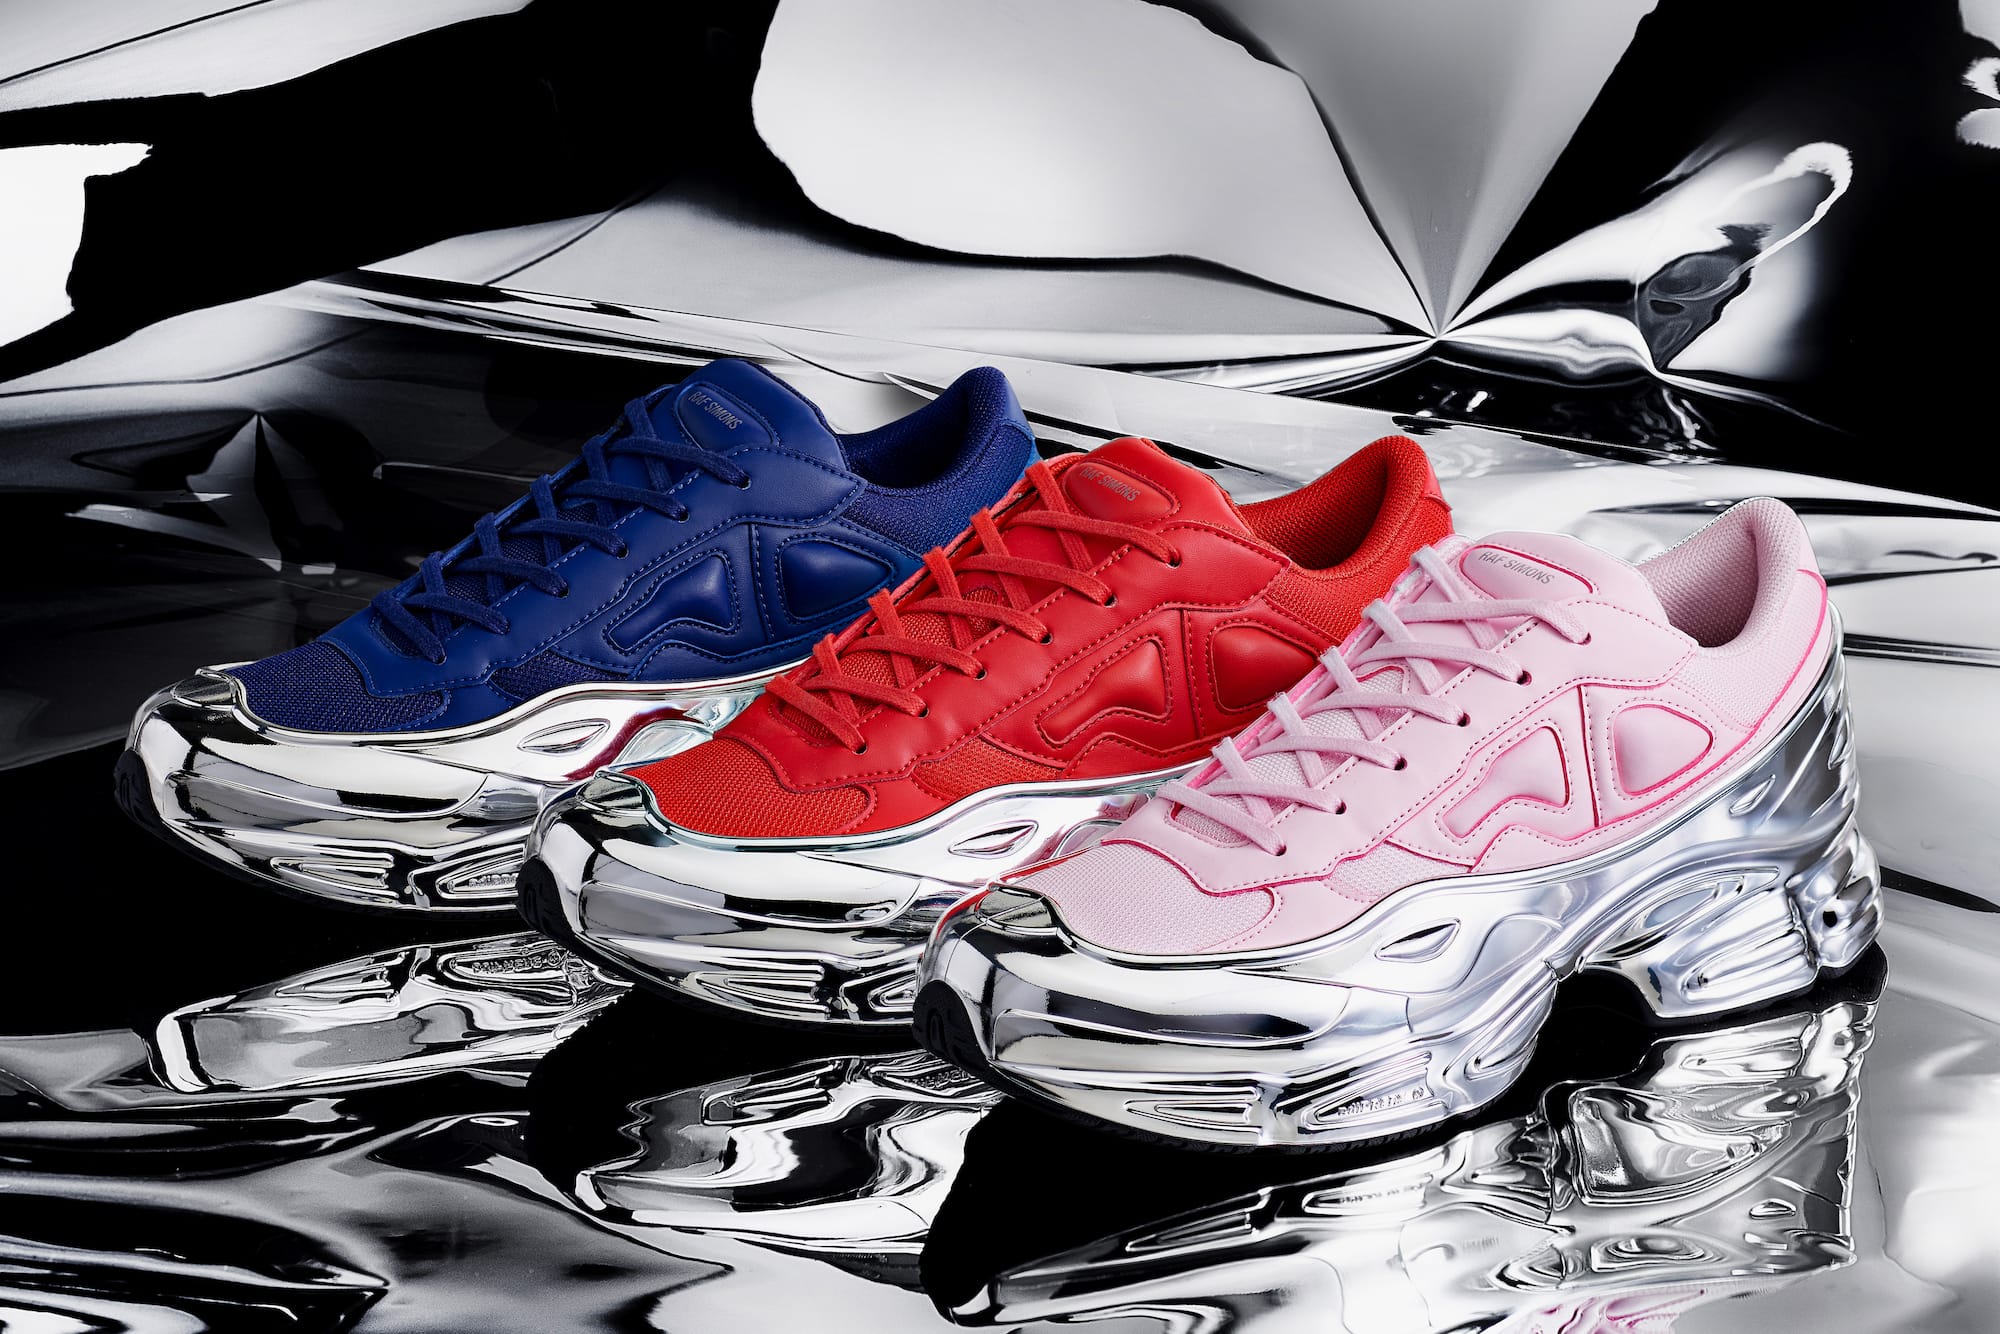 raf simons shoes pink and silver